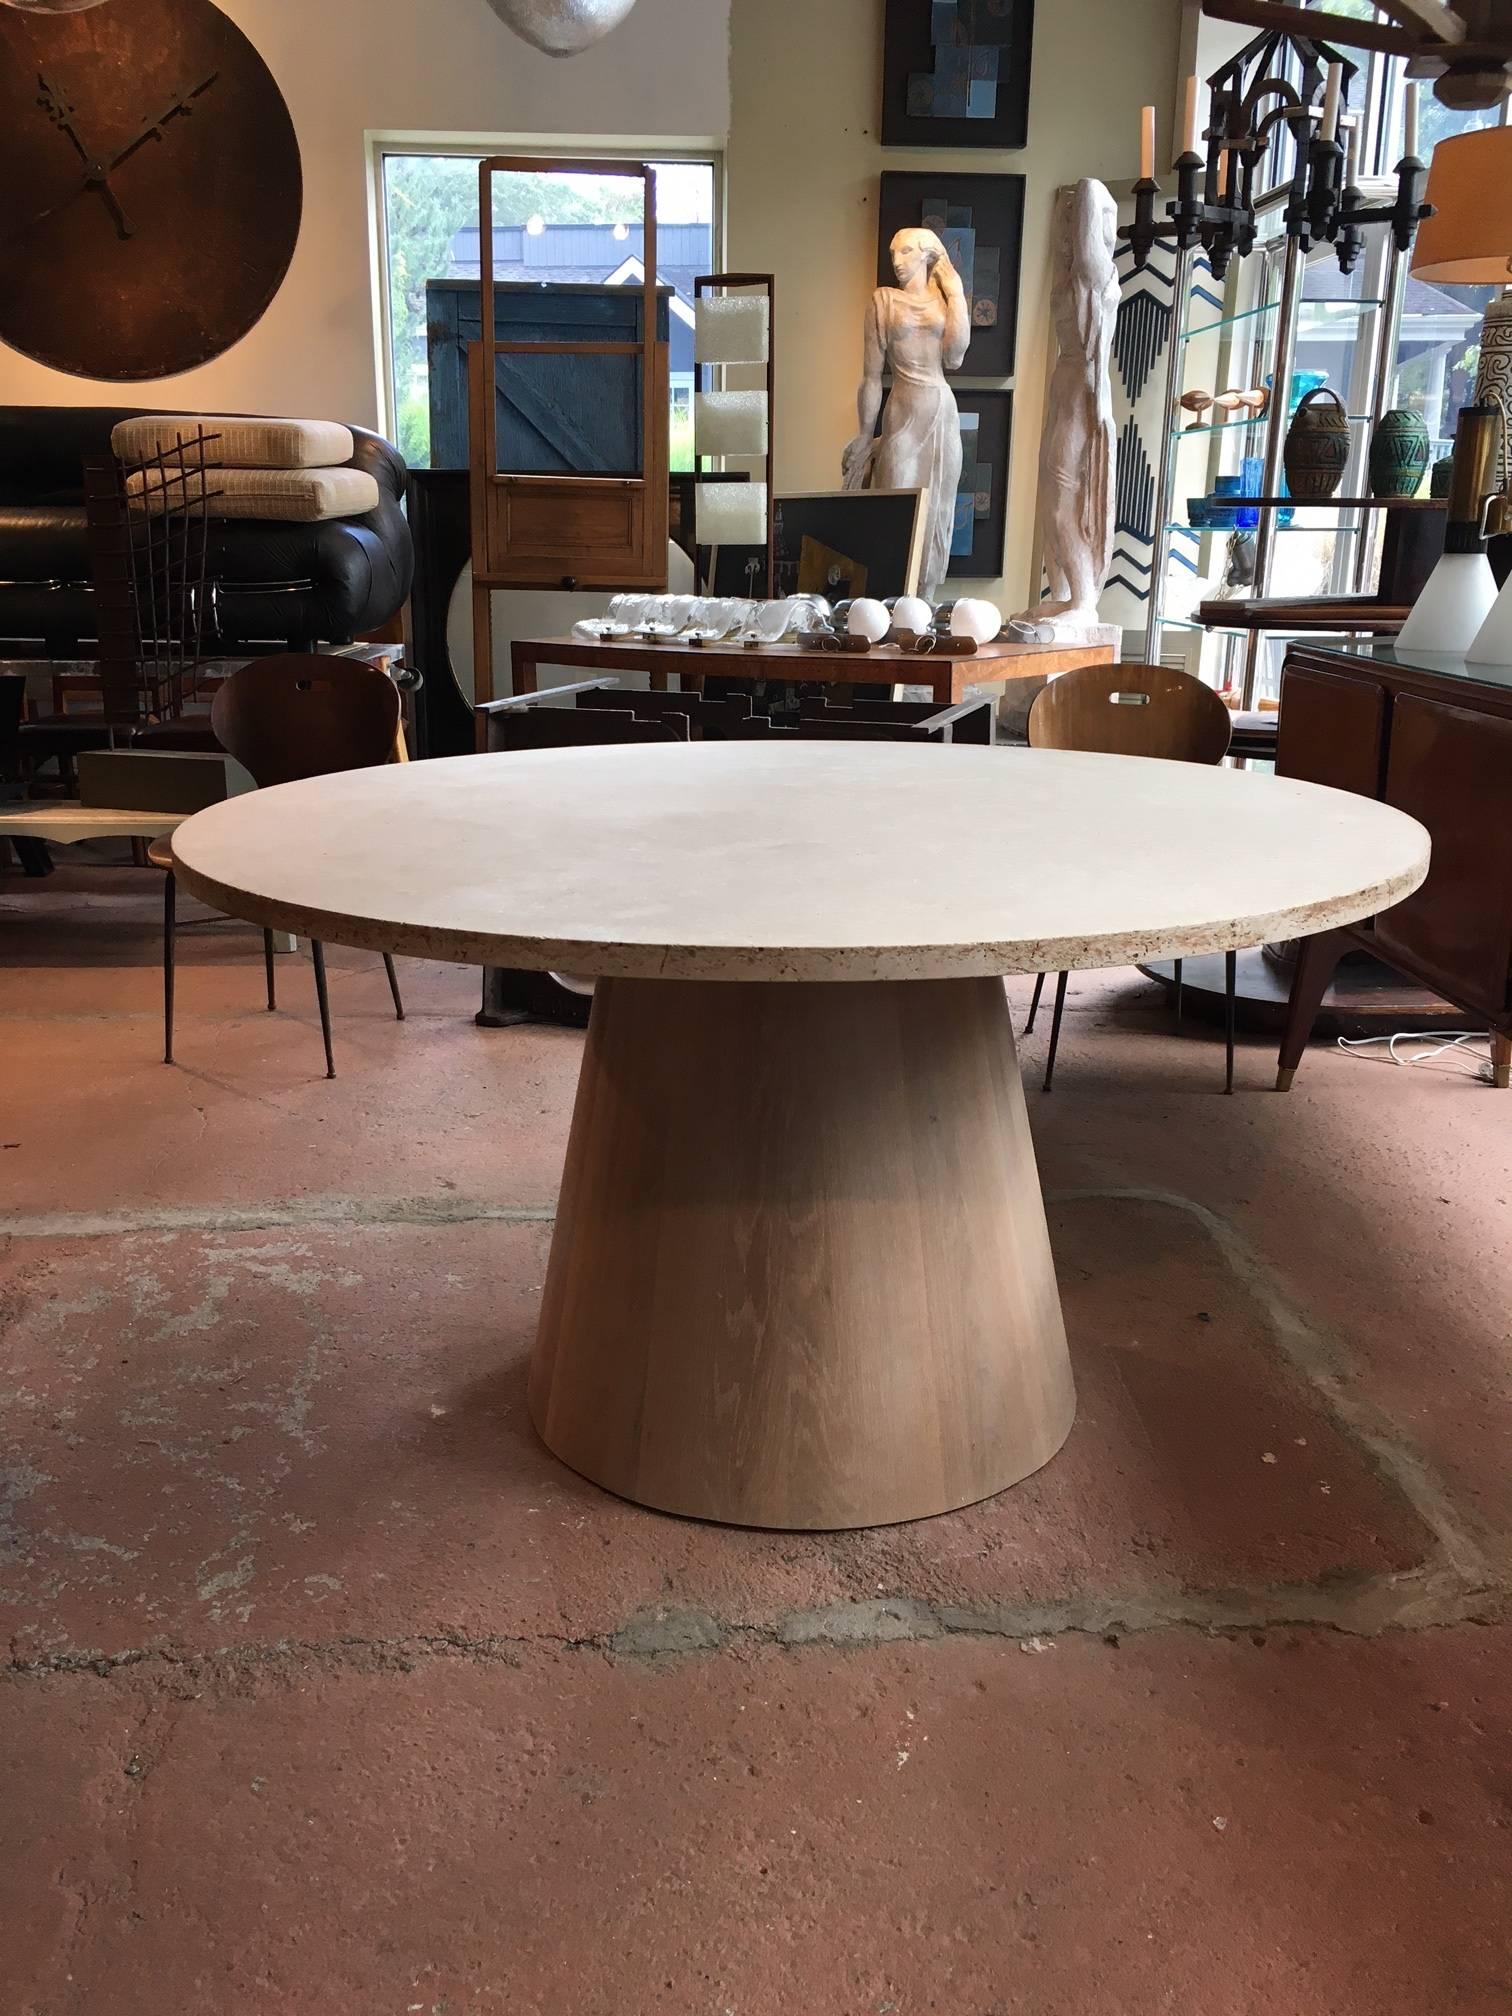 Great craftsmanship with a modern sensibility; travertine top center or dining table with solid oak angled cylinder base with a bleached washed finish; made to order; custom versions and options are available.
Avantgarden Ltd. cultivates unexpected